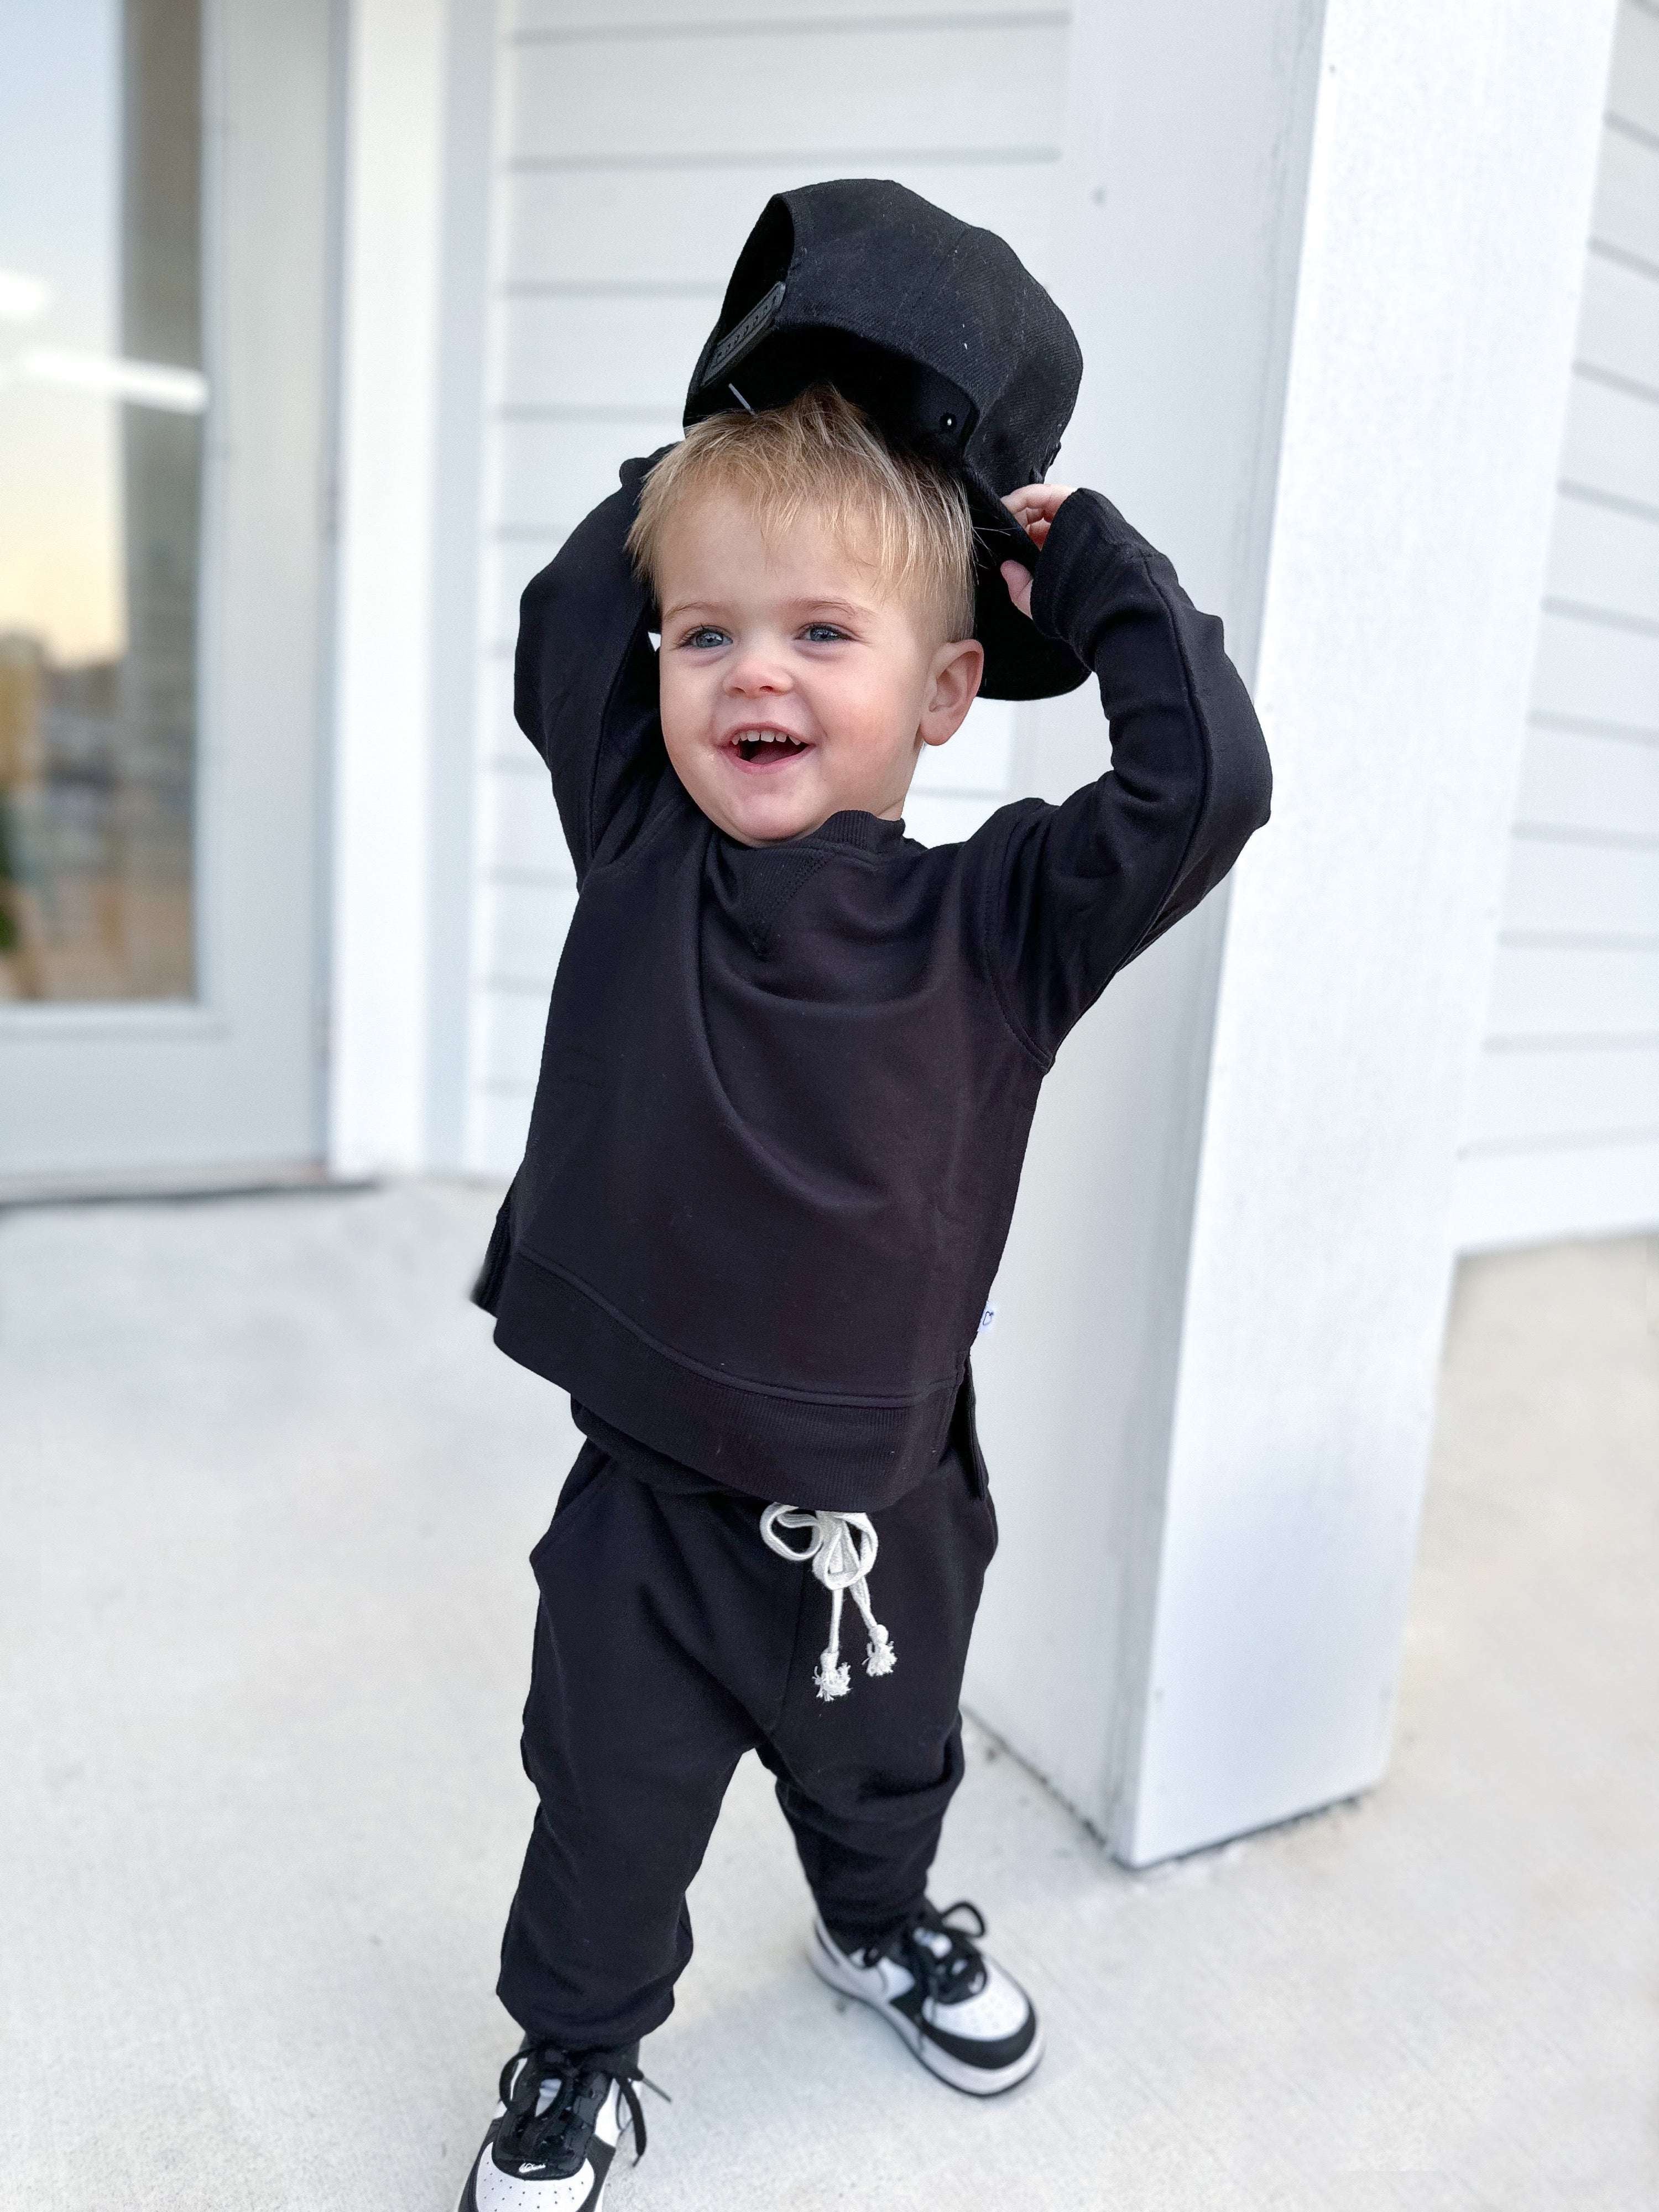 Black Terry Dream Joggers | Baby & Toddler Milk & Baby